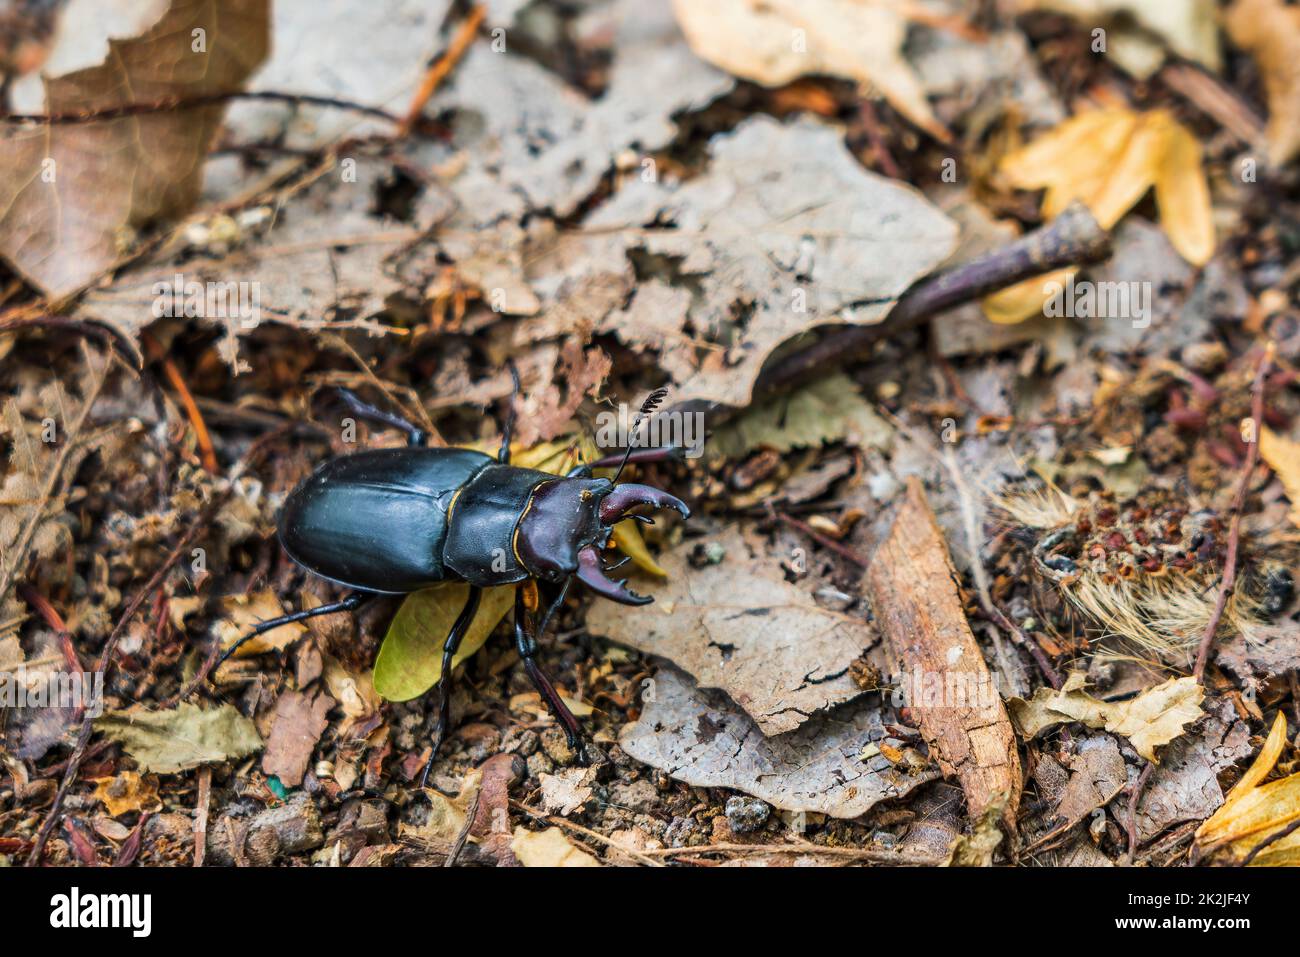 Stag beetle on dry leaves Stock Photo